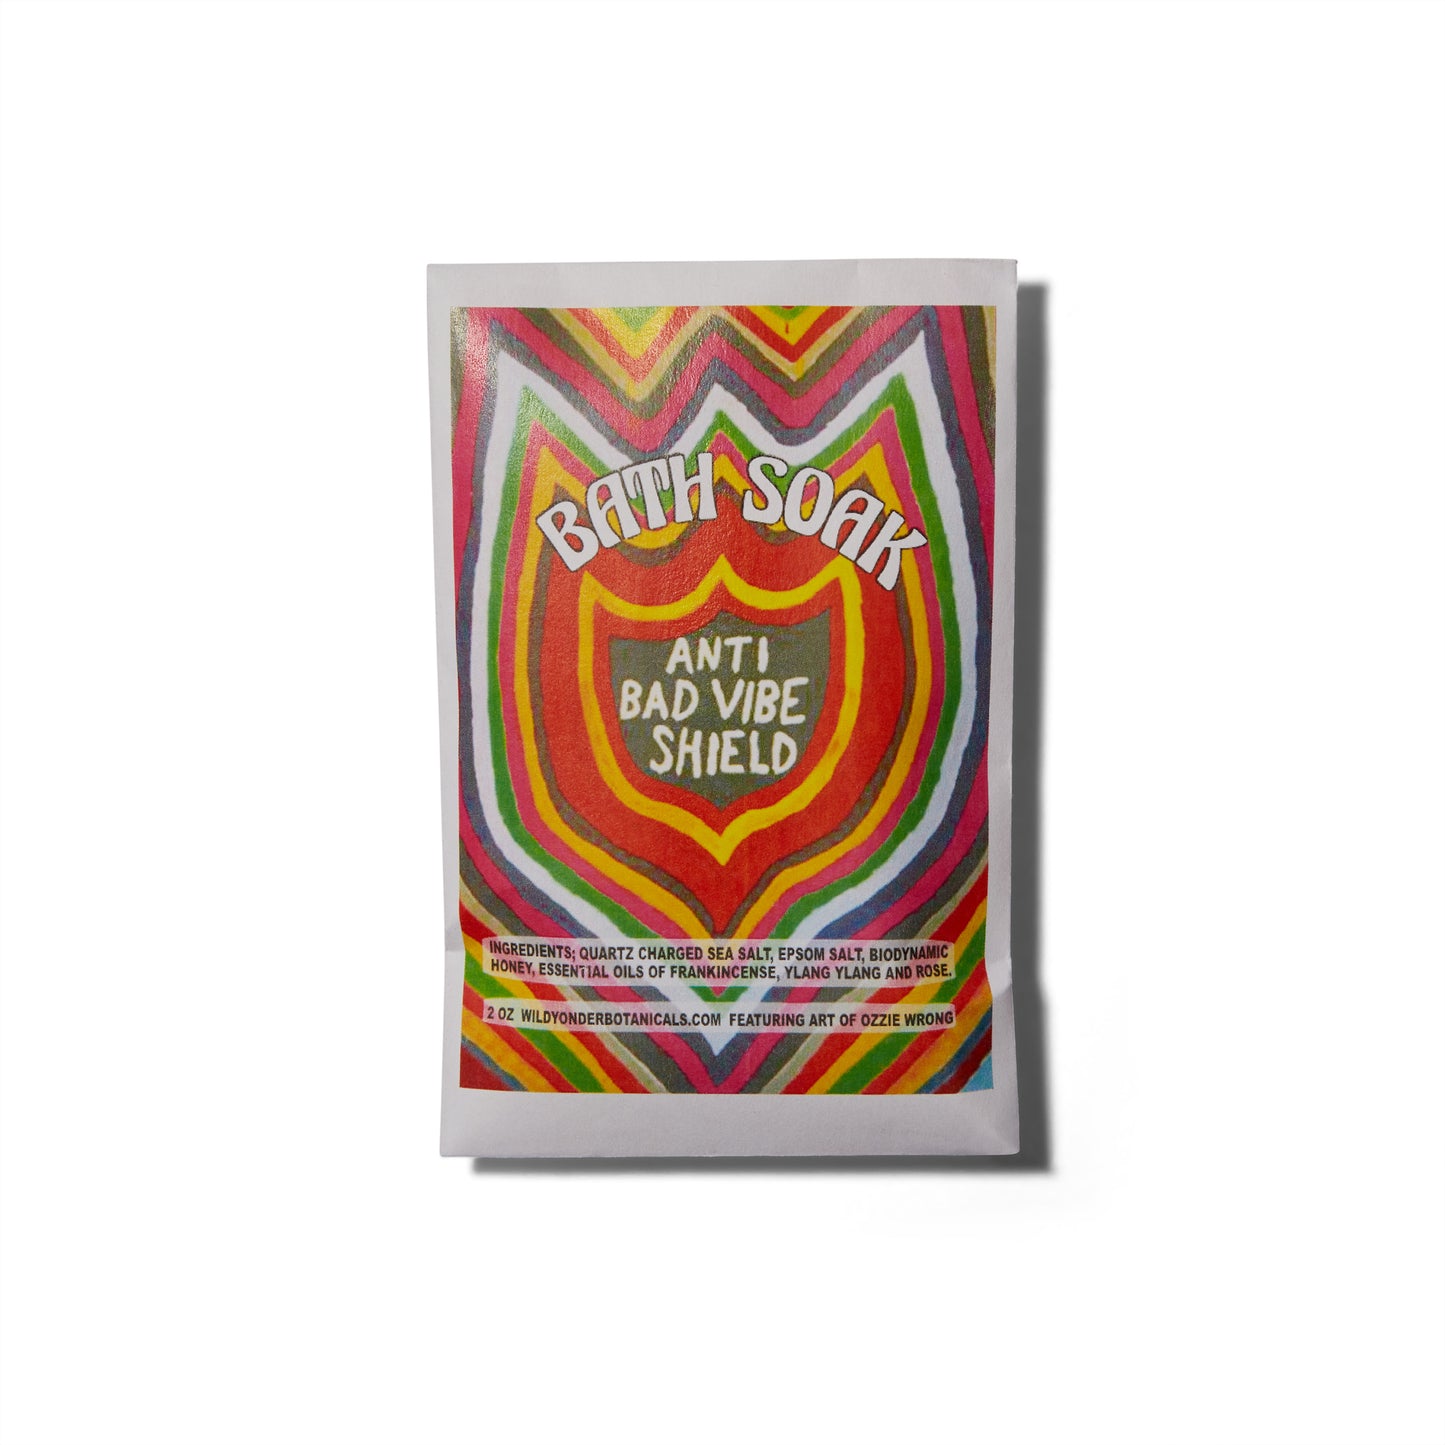 The Wild Yonder Bath Soak Salts in Anti Bad Vibe Shield. There is an illustration of a shield with rainbow stripes.